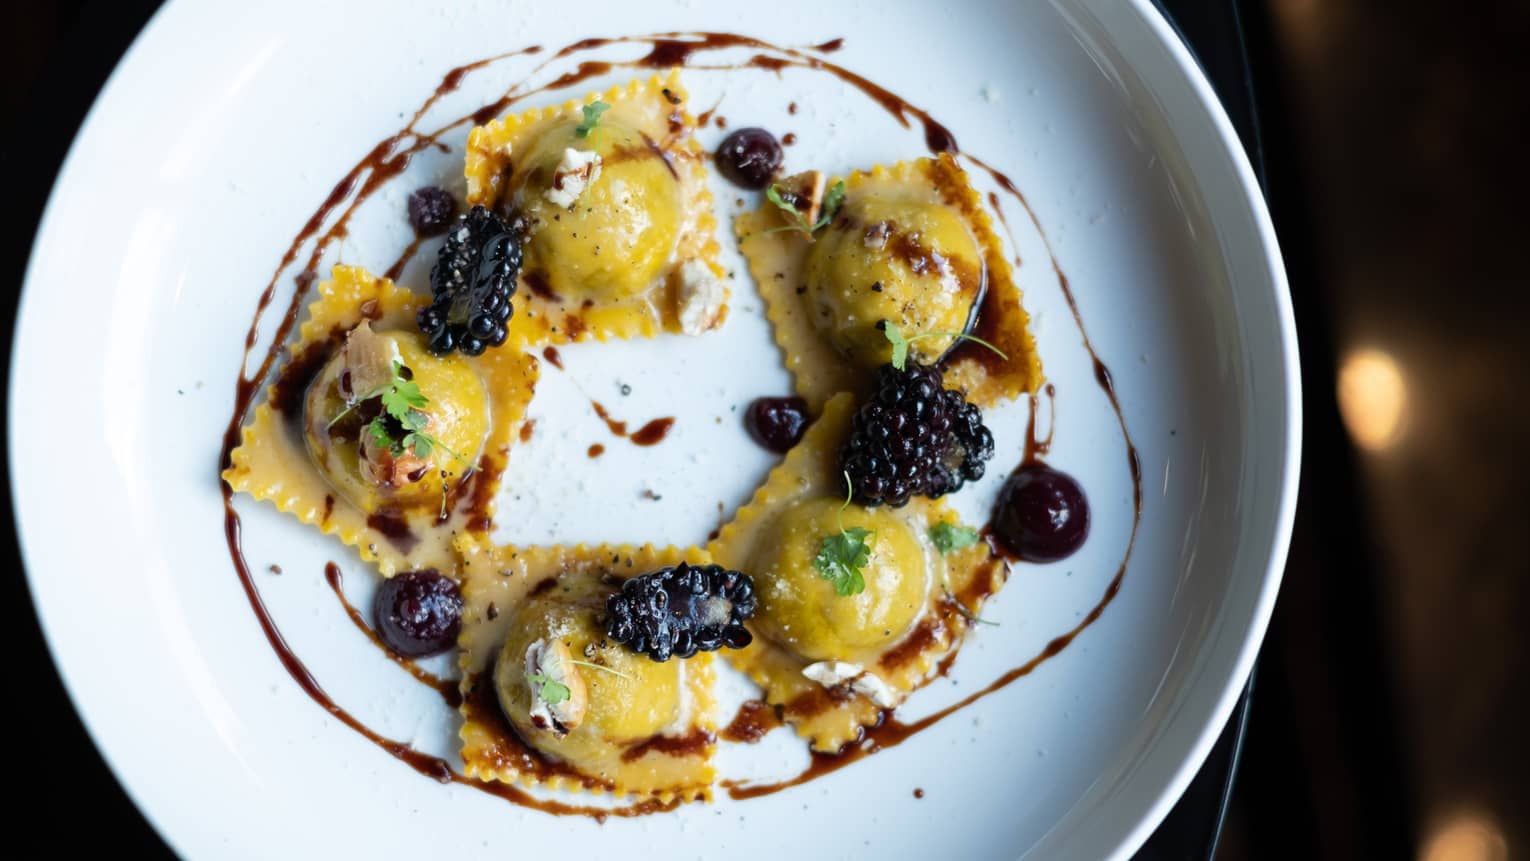 Five ravioli pastas arranged in circle on dish, garnished with sauce and blackberries